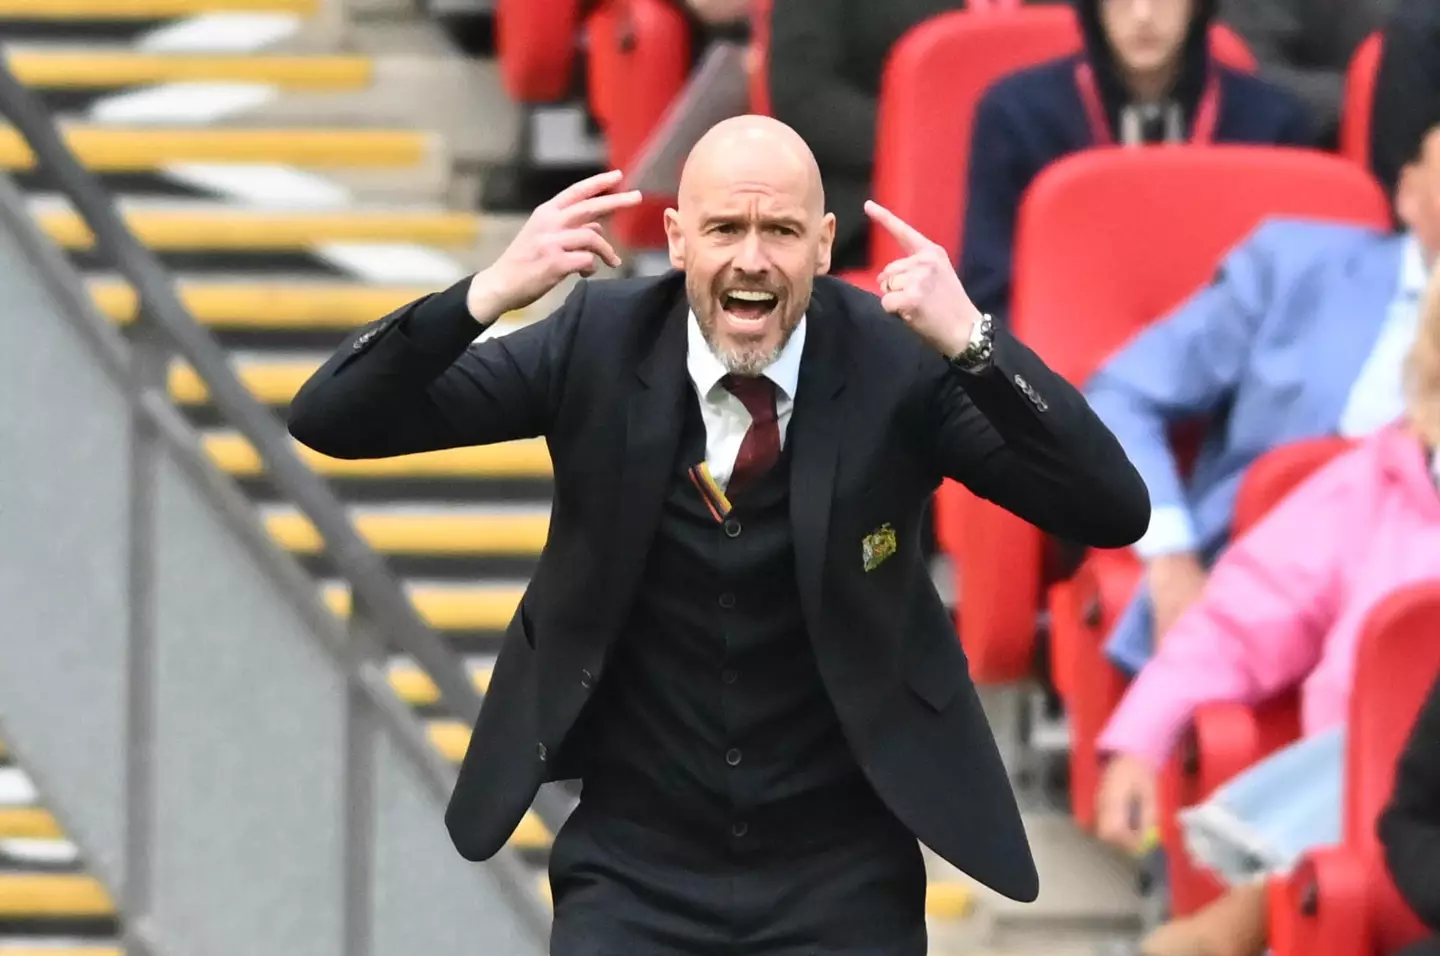 Erik ten Hag on the touchline during Manchester United vs. Coventry City. Image: Getty